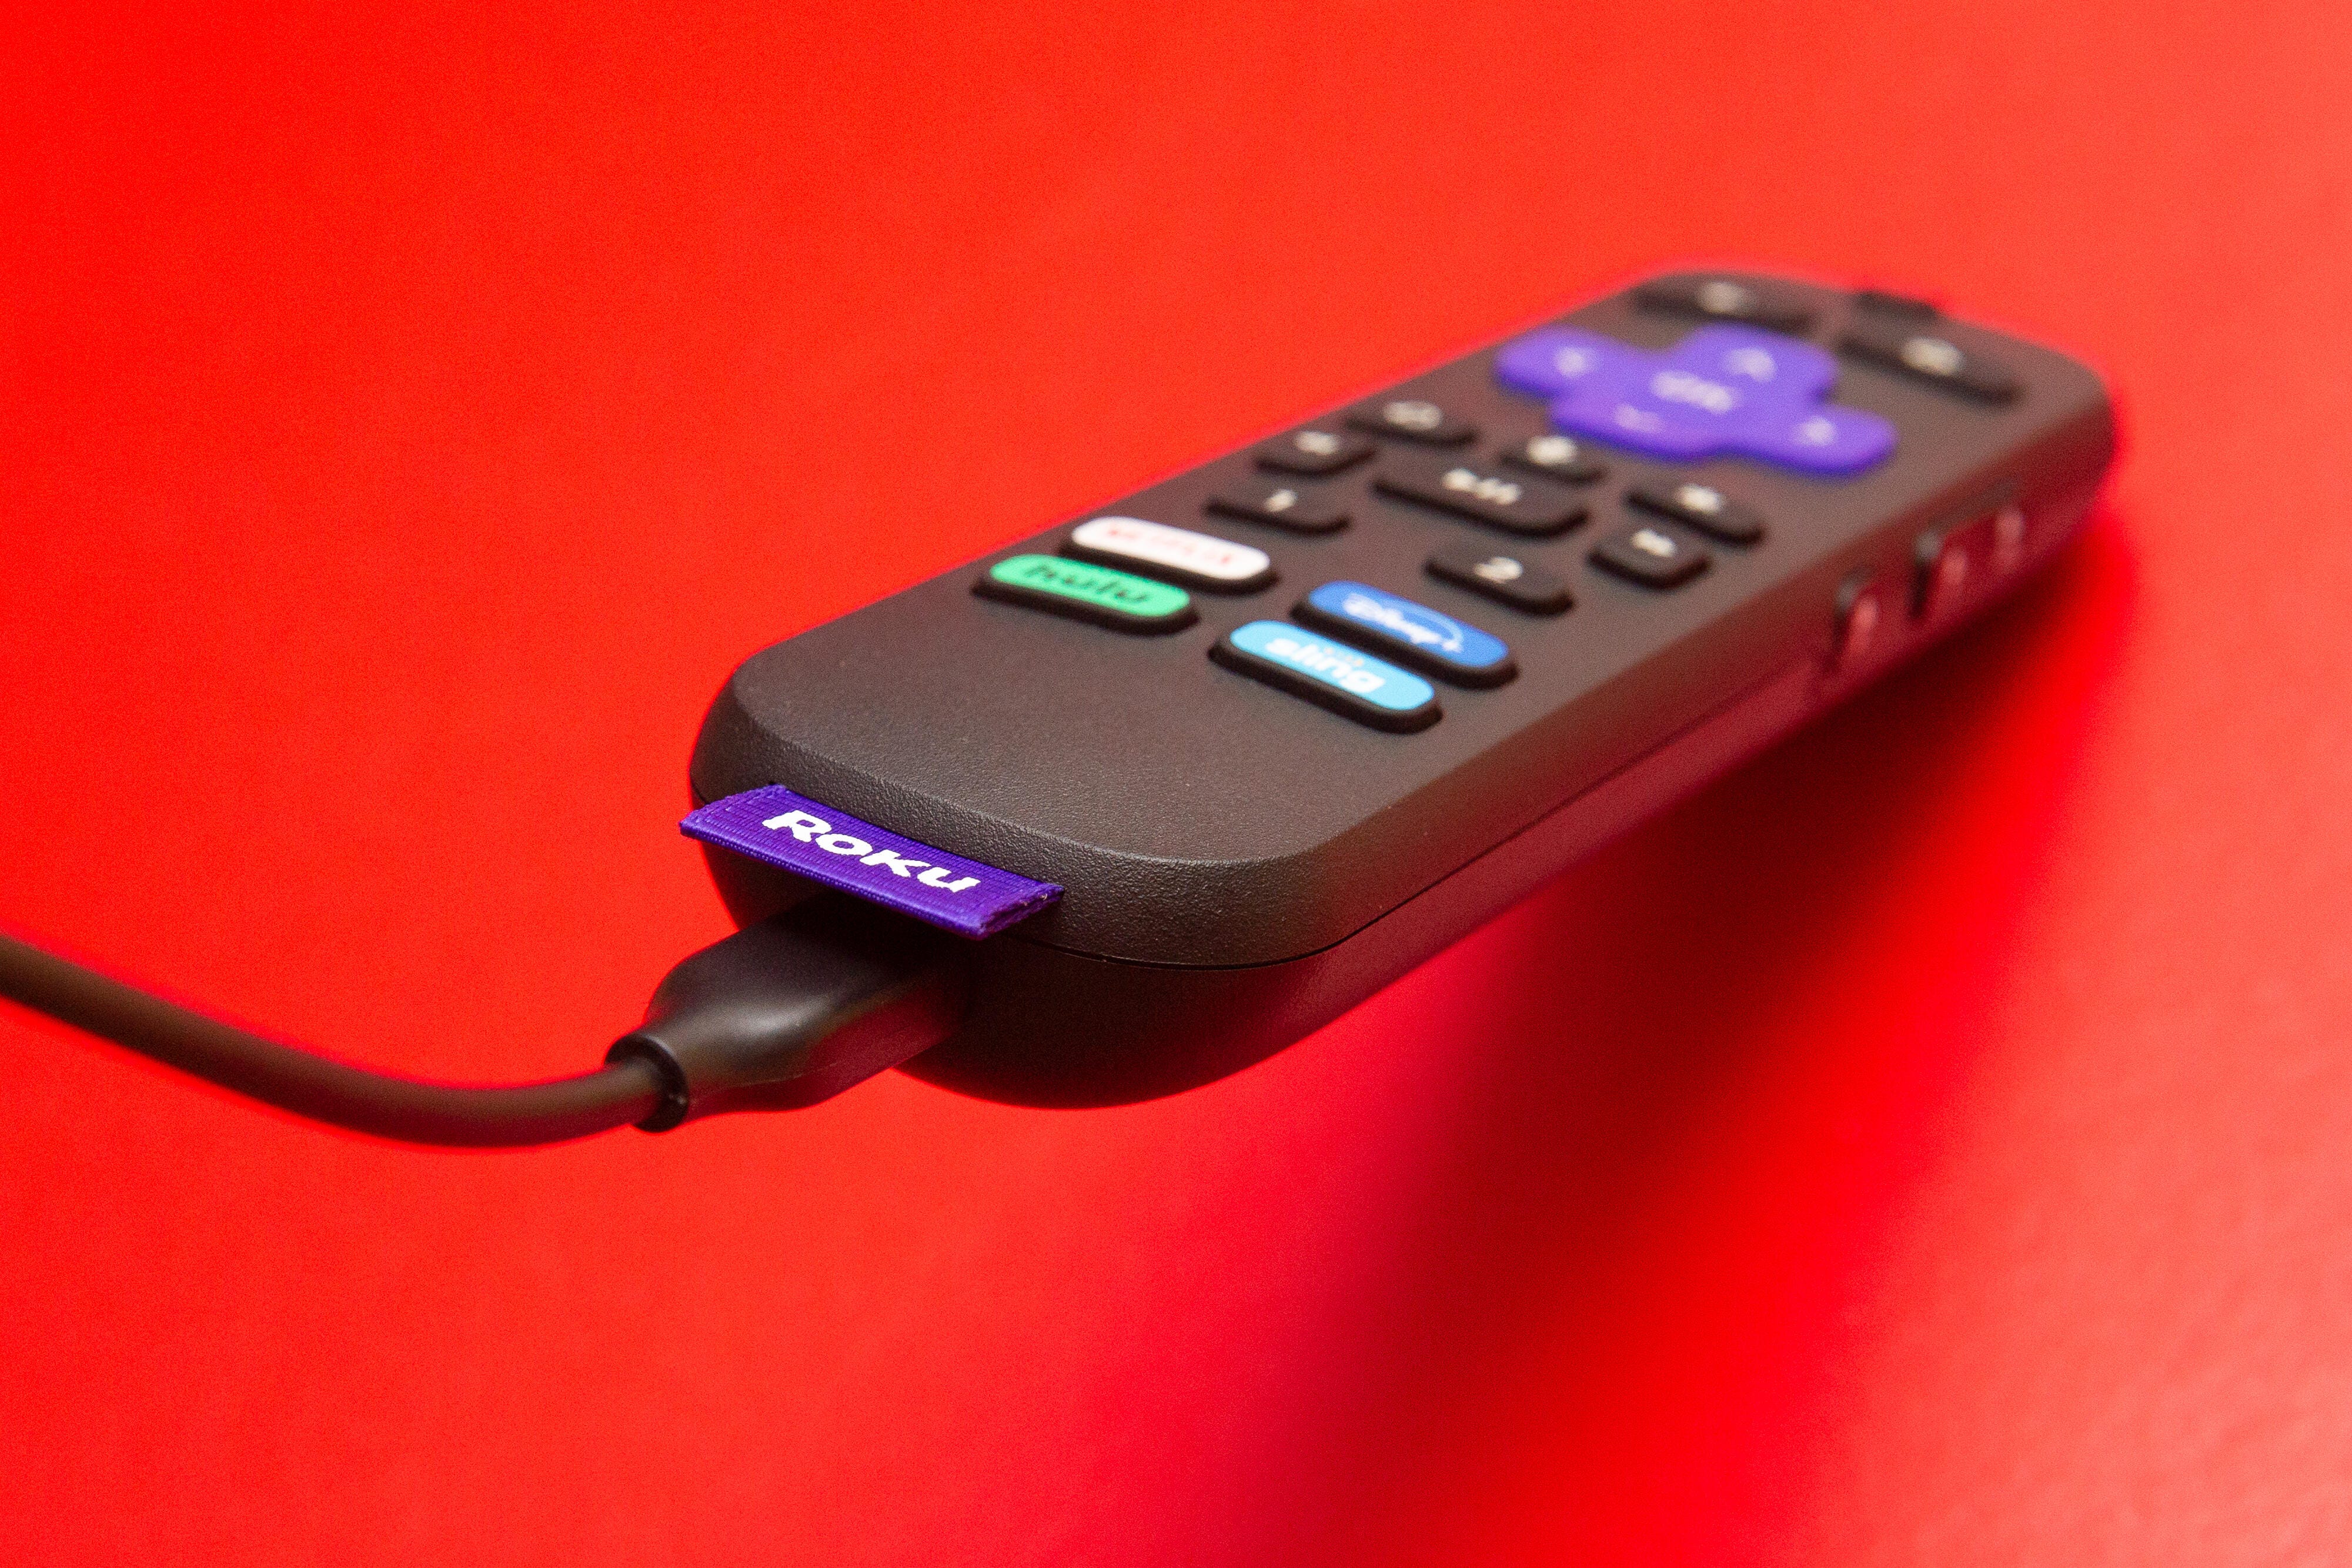 Now you’ll never lose your Roku remote again